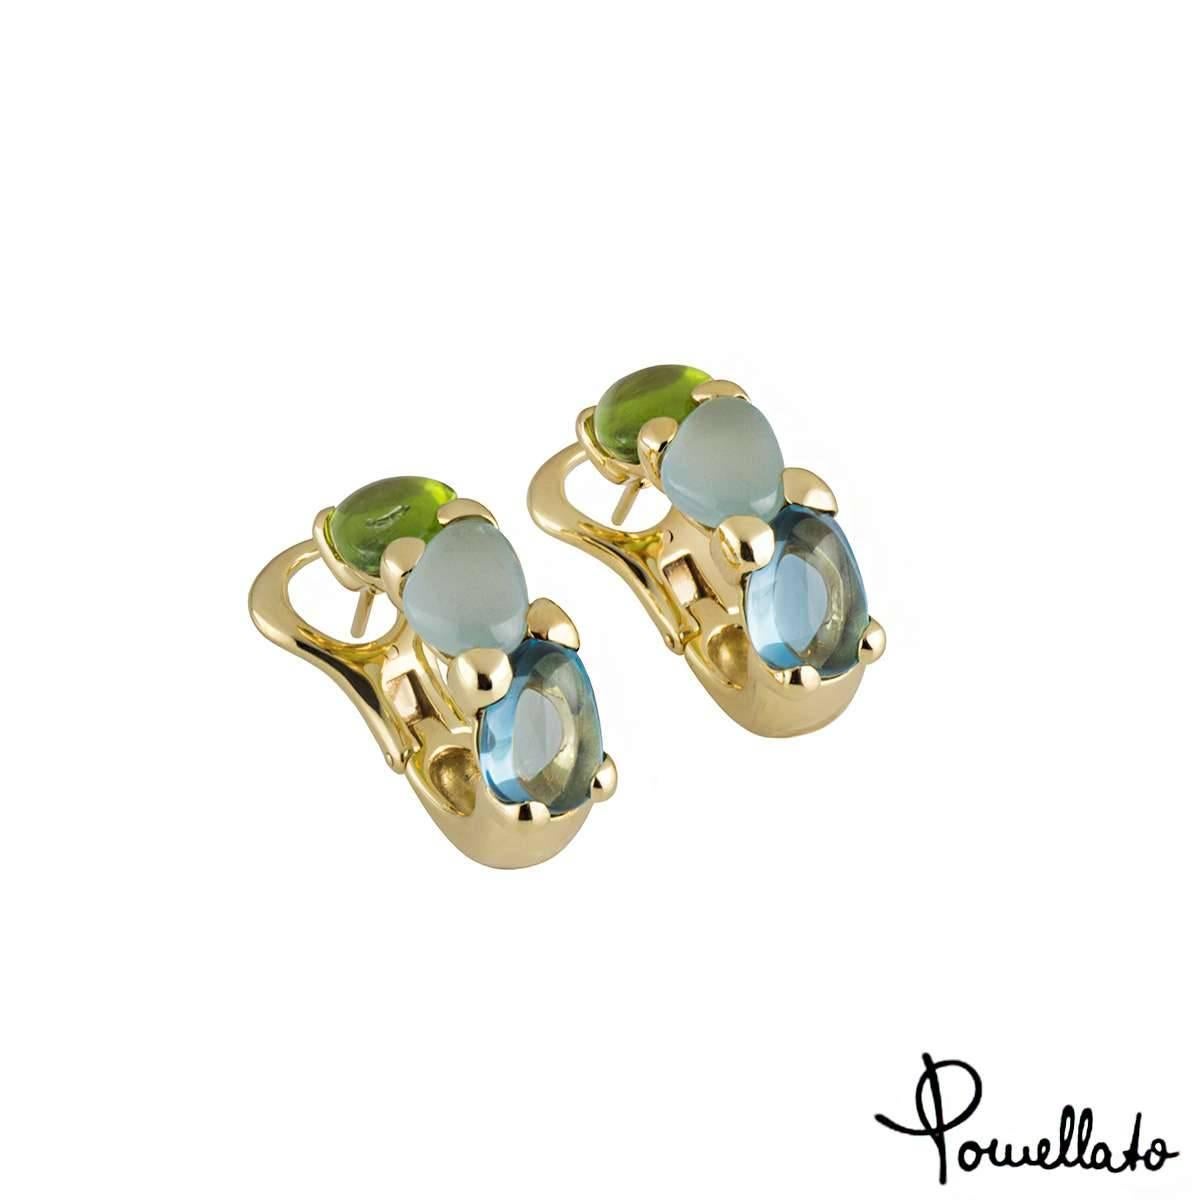 A unique pair of 18k yellow gold Pomellato multi-gemstone hoop earrings from the Saffi collection. Each earring comprises of a peridot, aquamarine and topaz set vertically in a prong setting. The earrings feature post and hinged clip fittings and